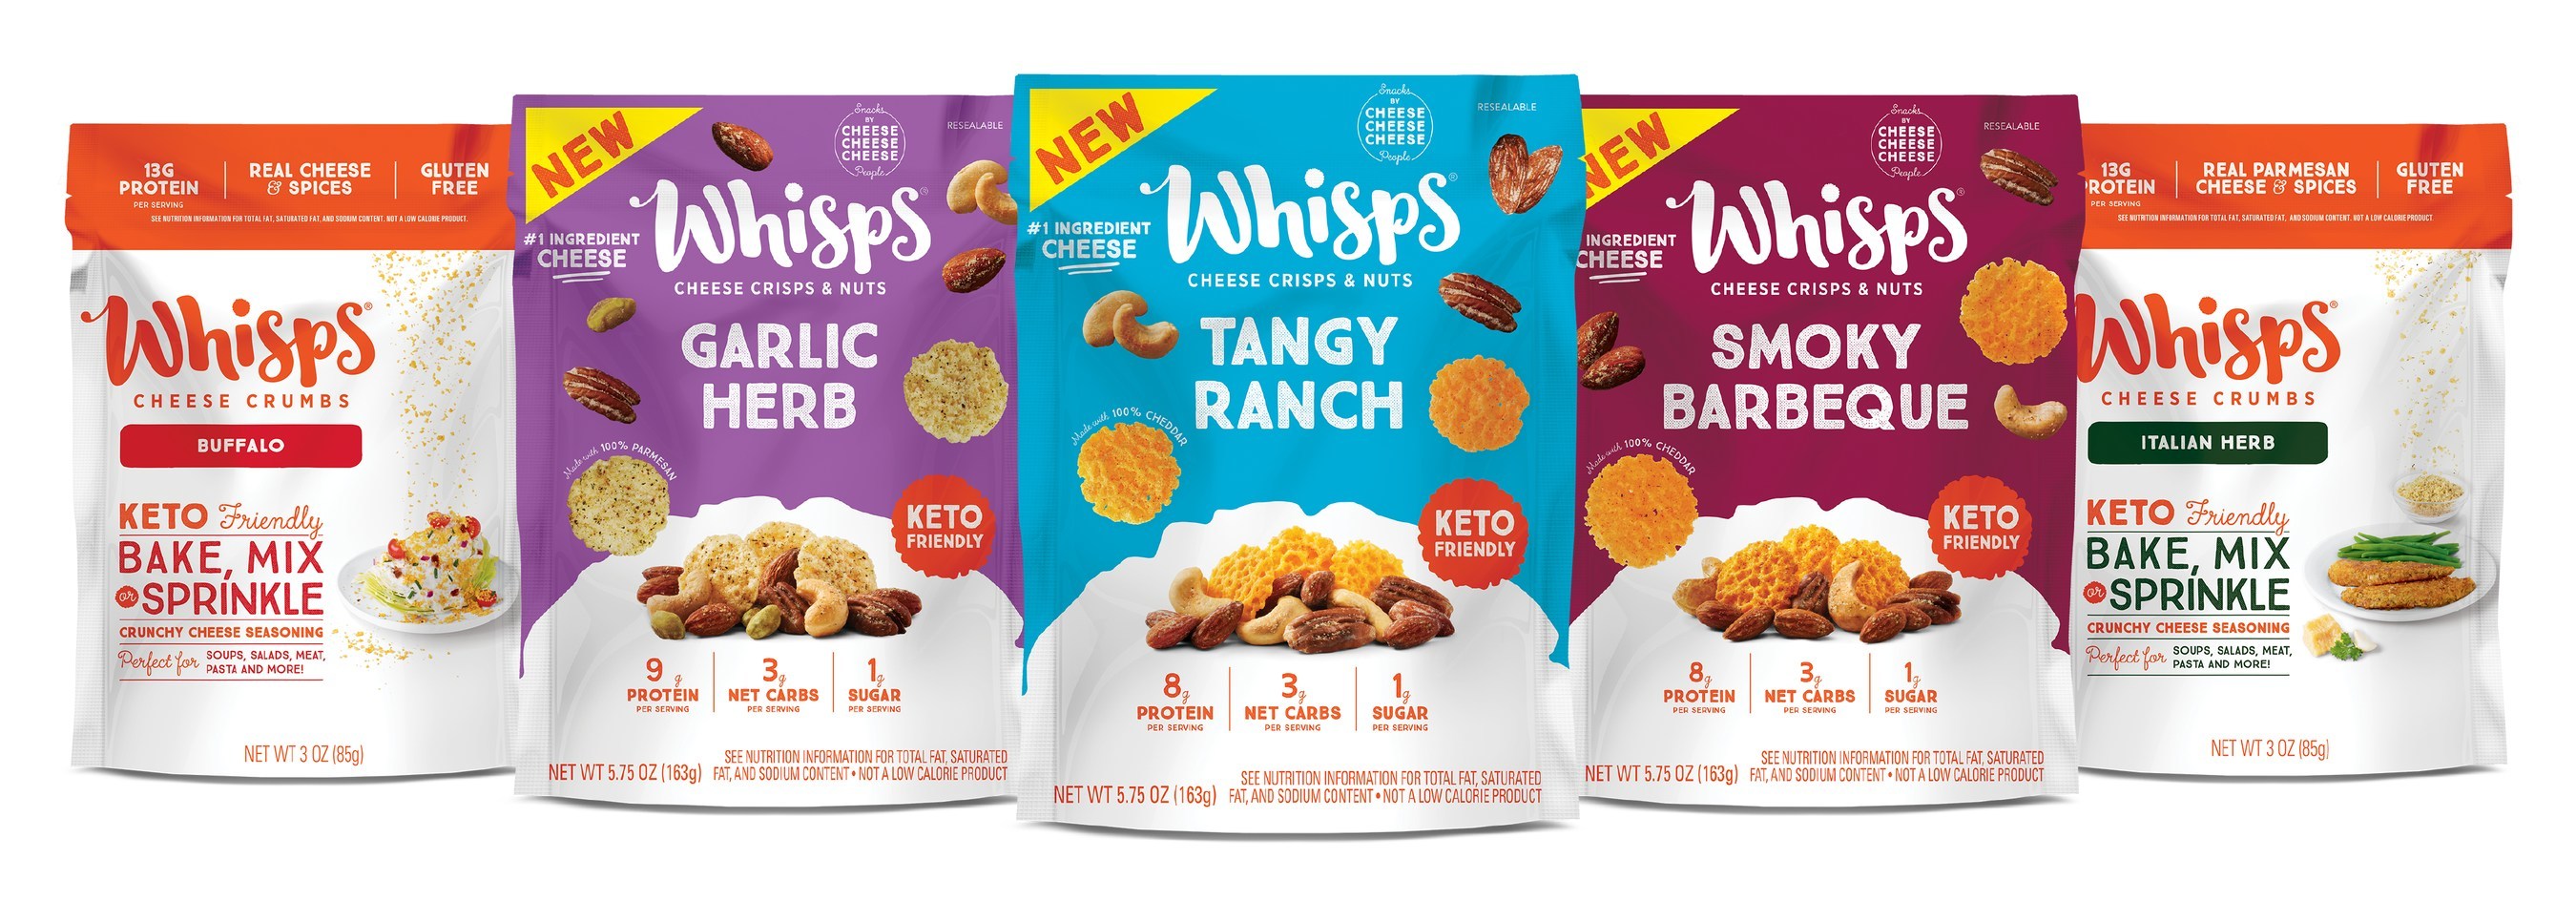 Both the crumbs for cooking, and the crisps and nuts for snacking feature parmesan and cheddar cheeses made exclusively for Whisps